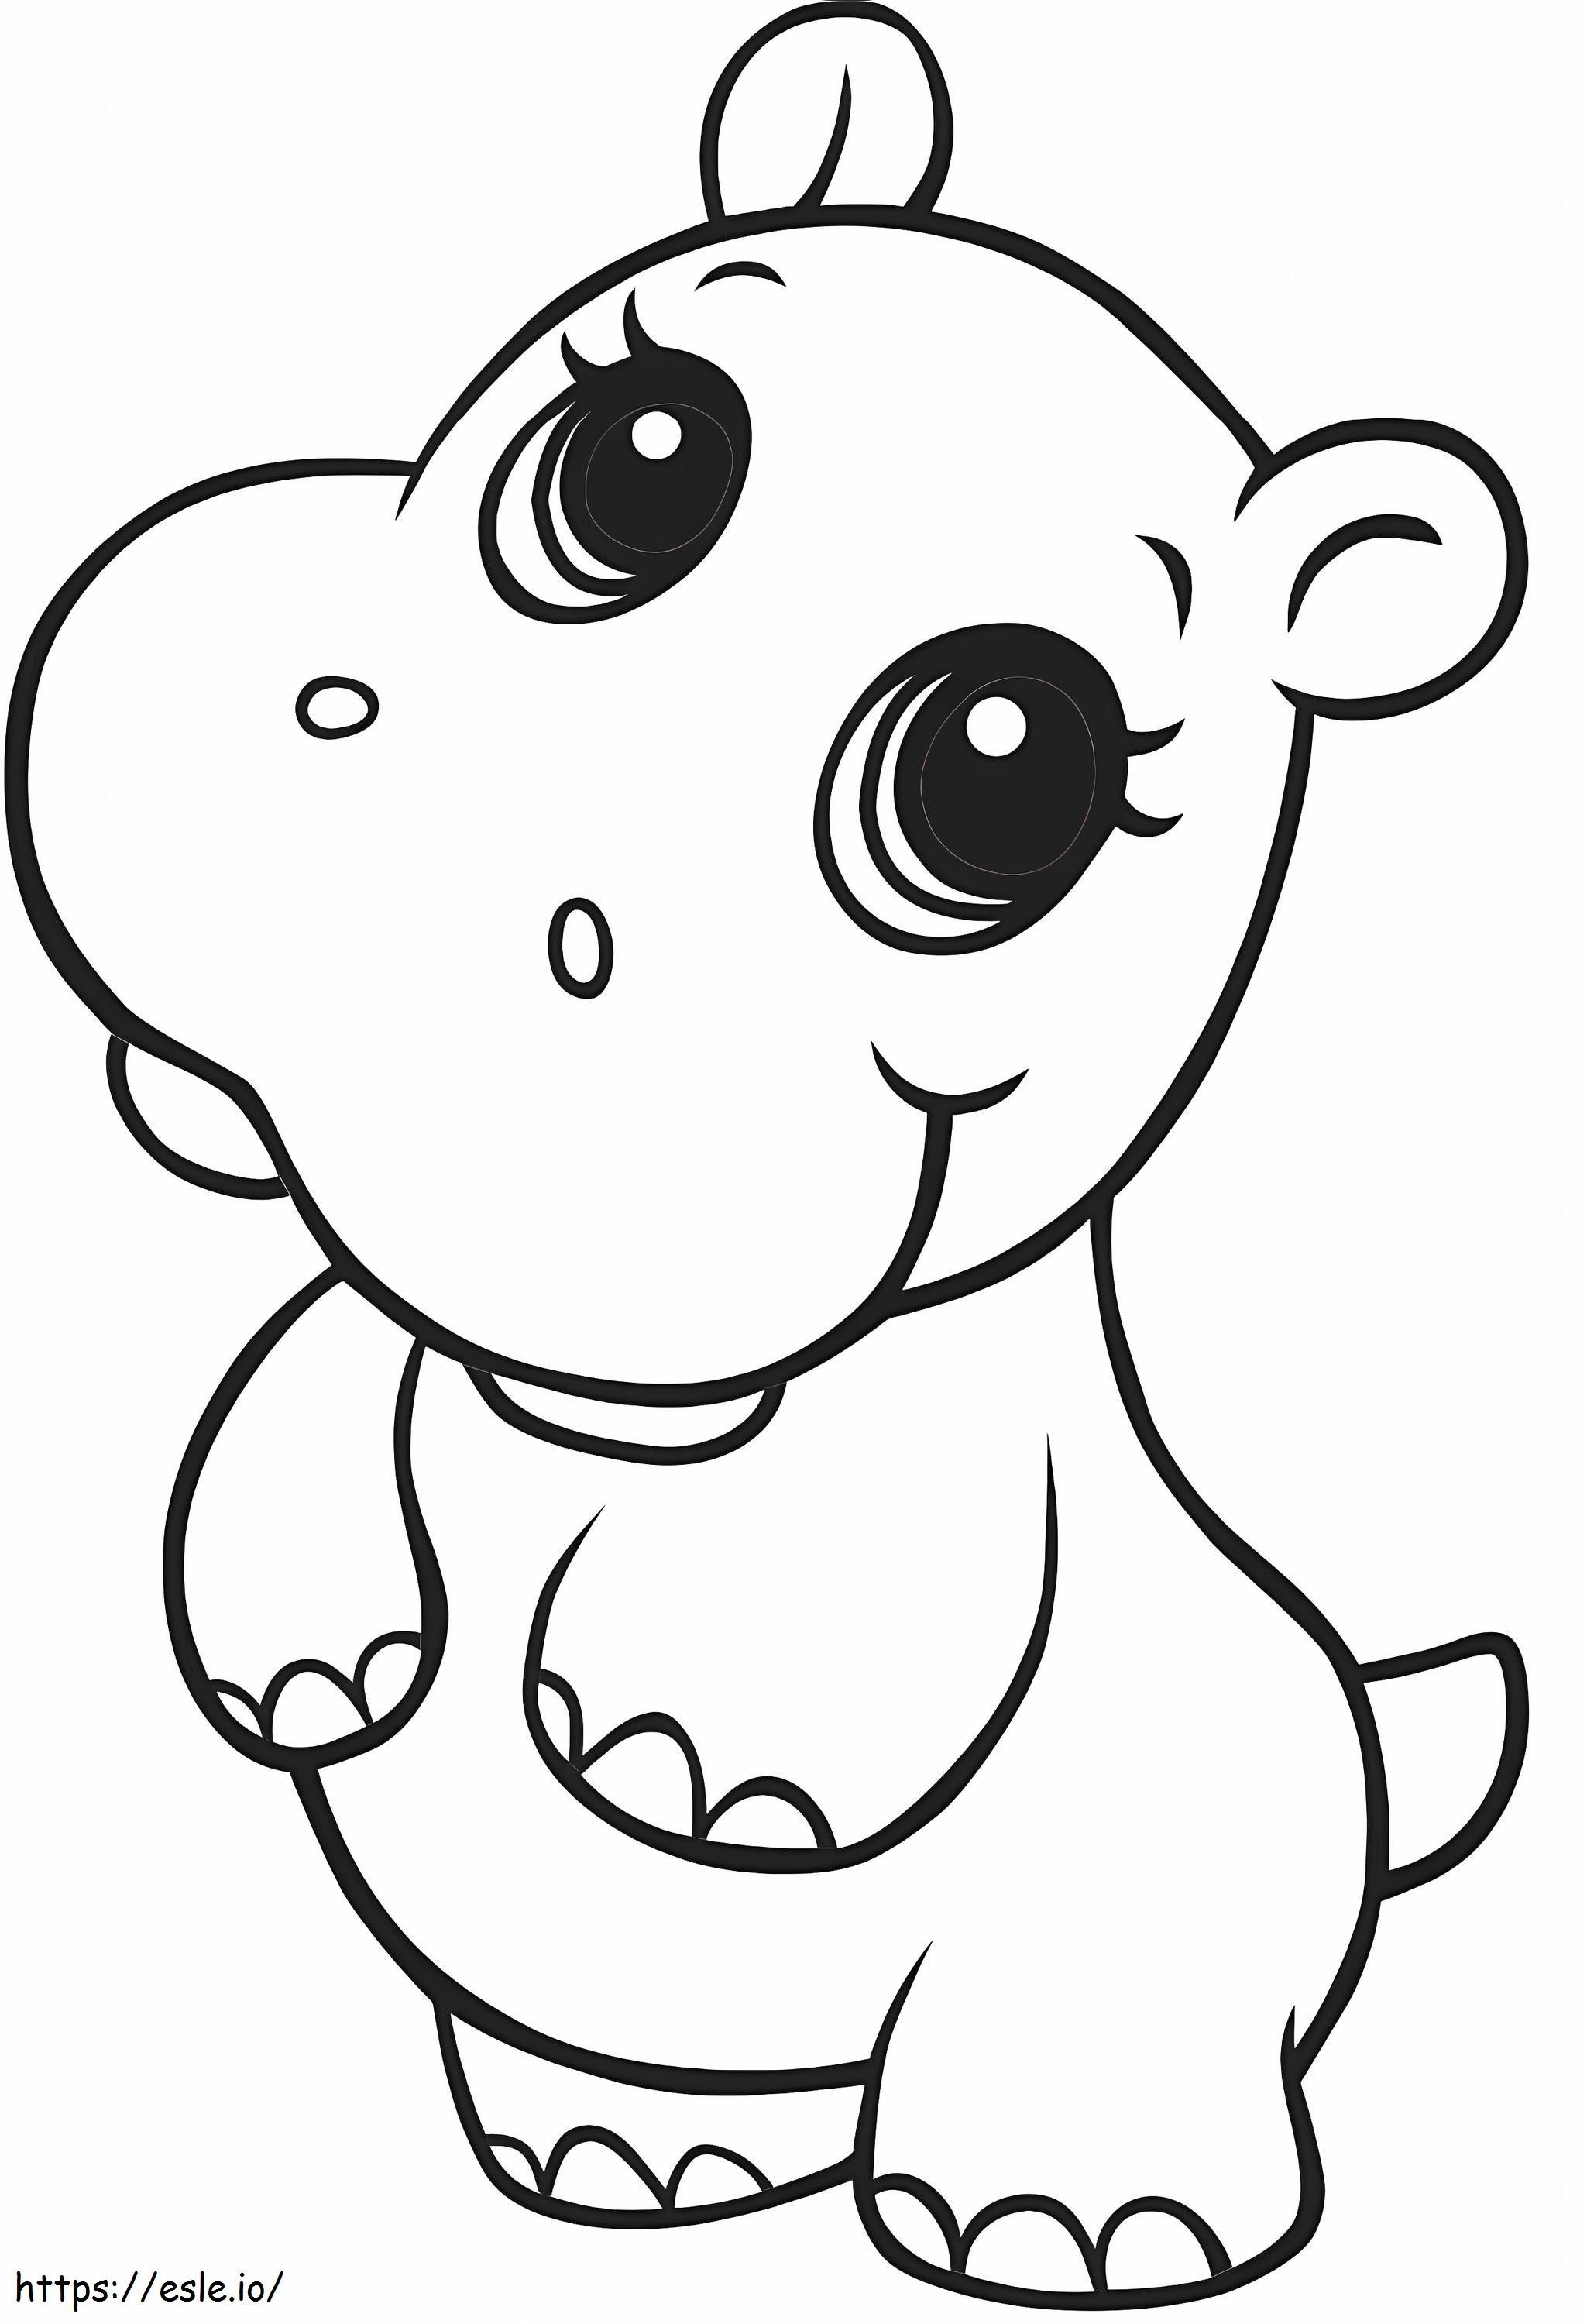 1559988691 Cute Hippo A4 coloring page